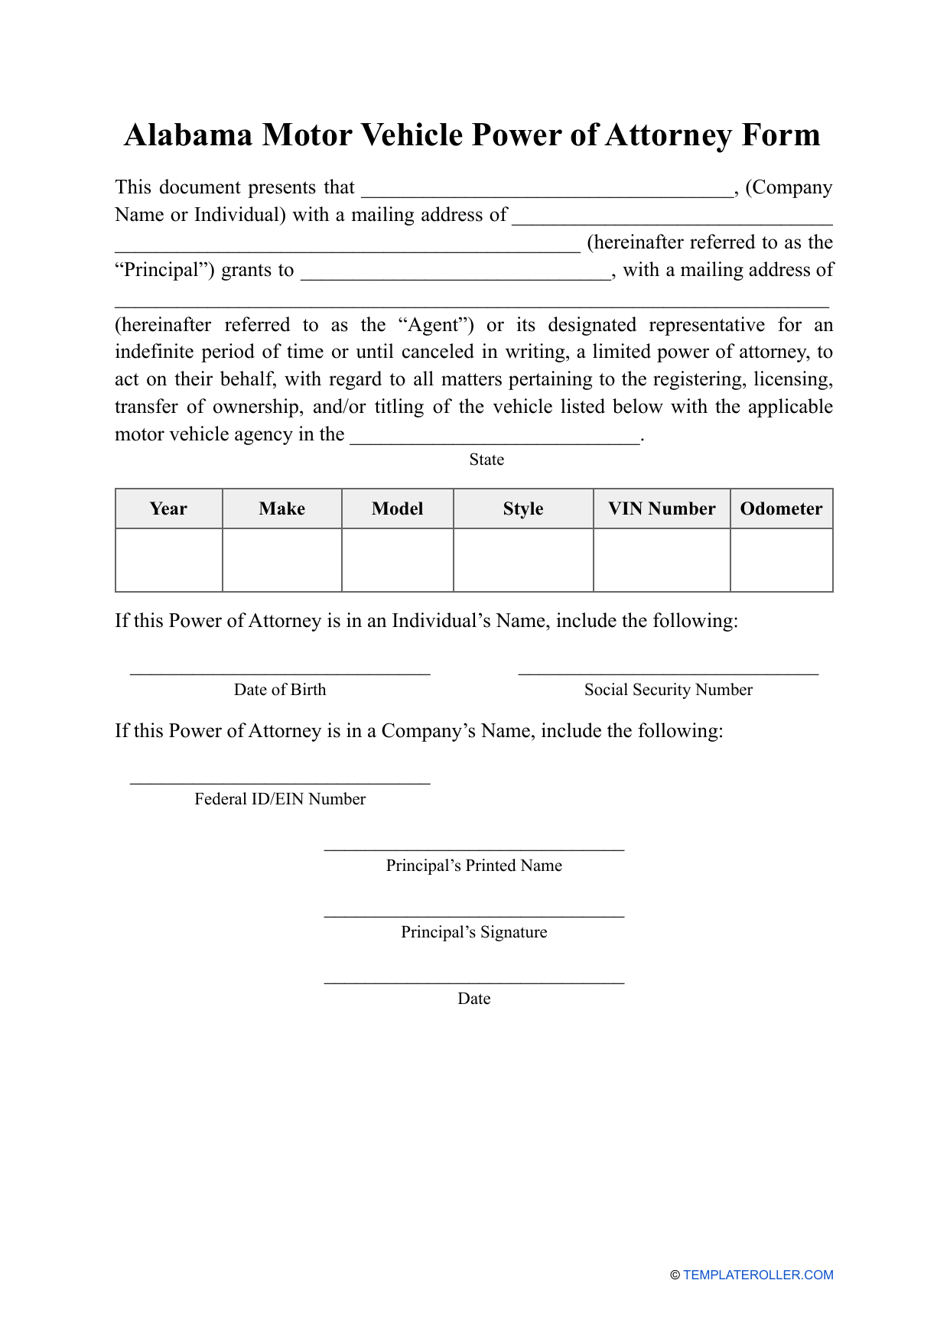 Motor Vehicle Power of Attorney Form - Alabama, Page 1